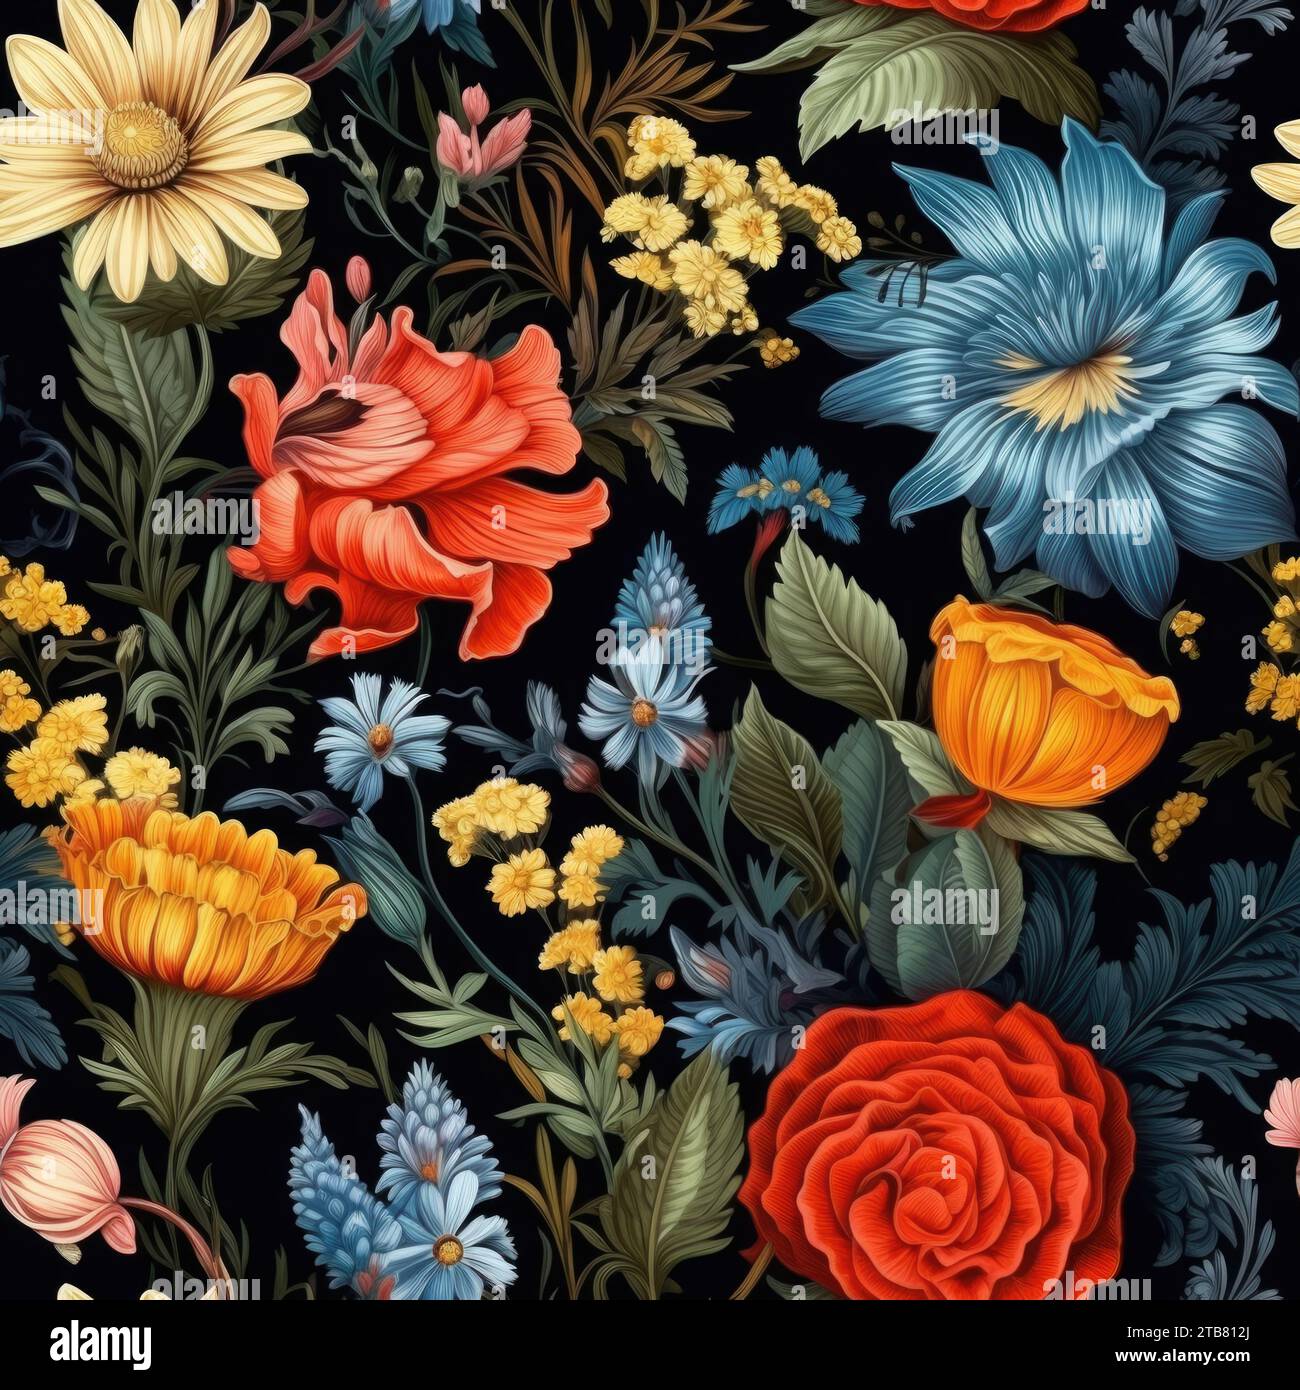 A vibrant floral pattern featuring various flowers in full bloom on a dark black background Stock Photo